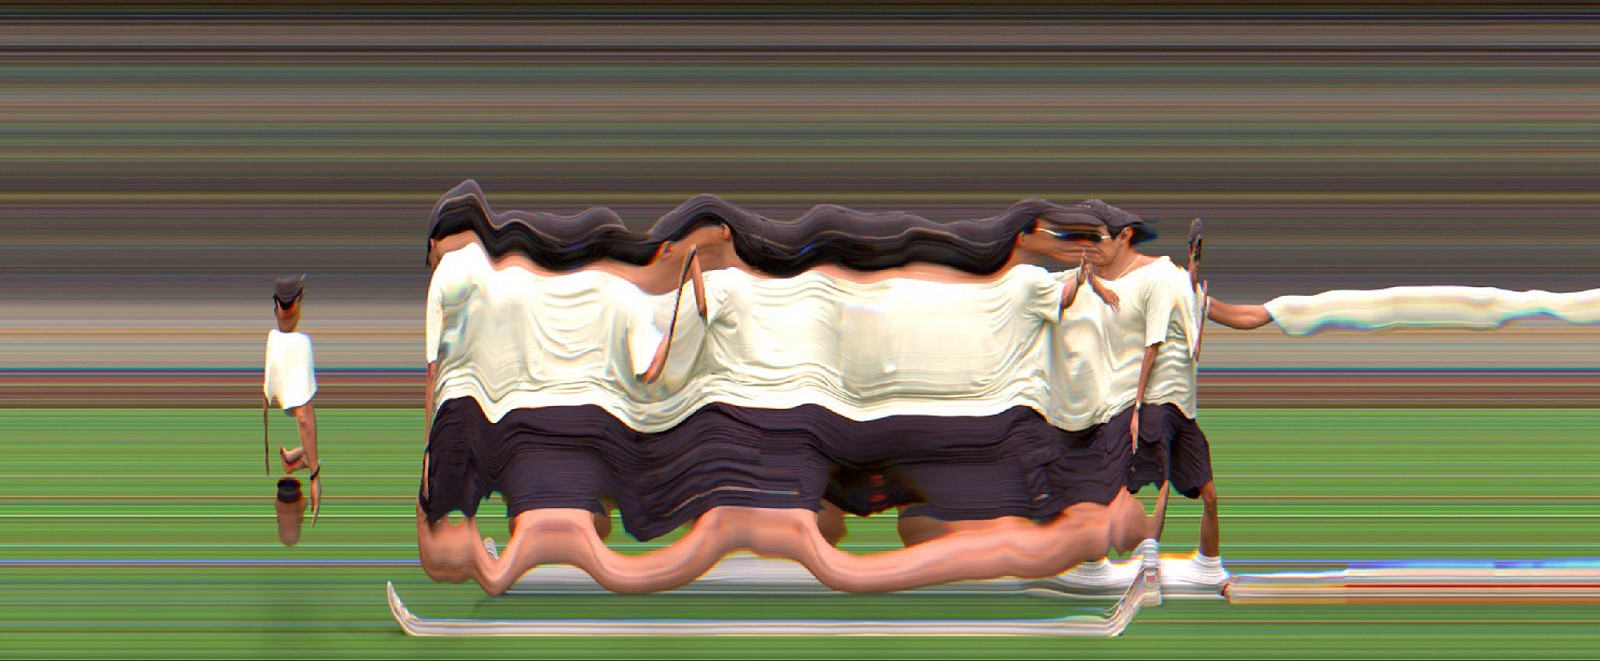 Jay Mark Johnson, TAICHI MOTION STUDY 116, 2005 Los Angeles CA
archival pigment on paper, mounted on aluminum, 40 x 97 in. (101.6 x 246.4 cm)